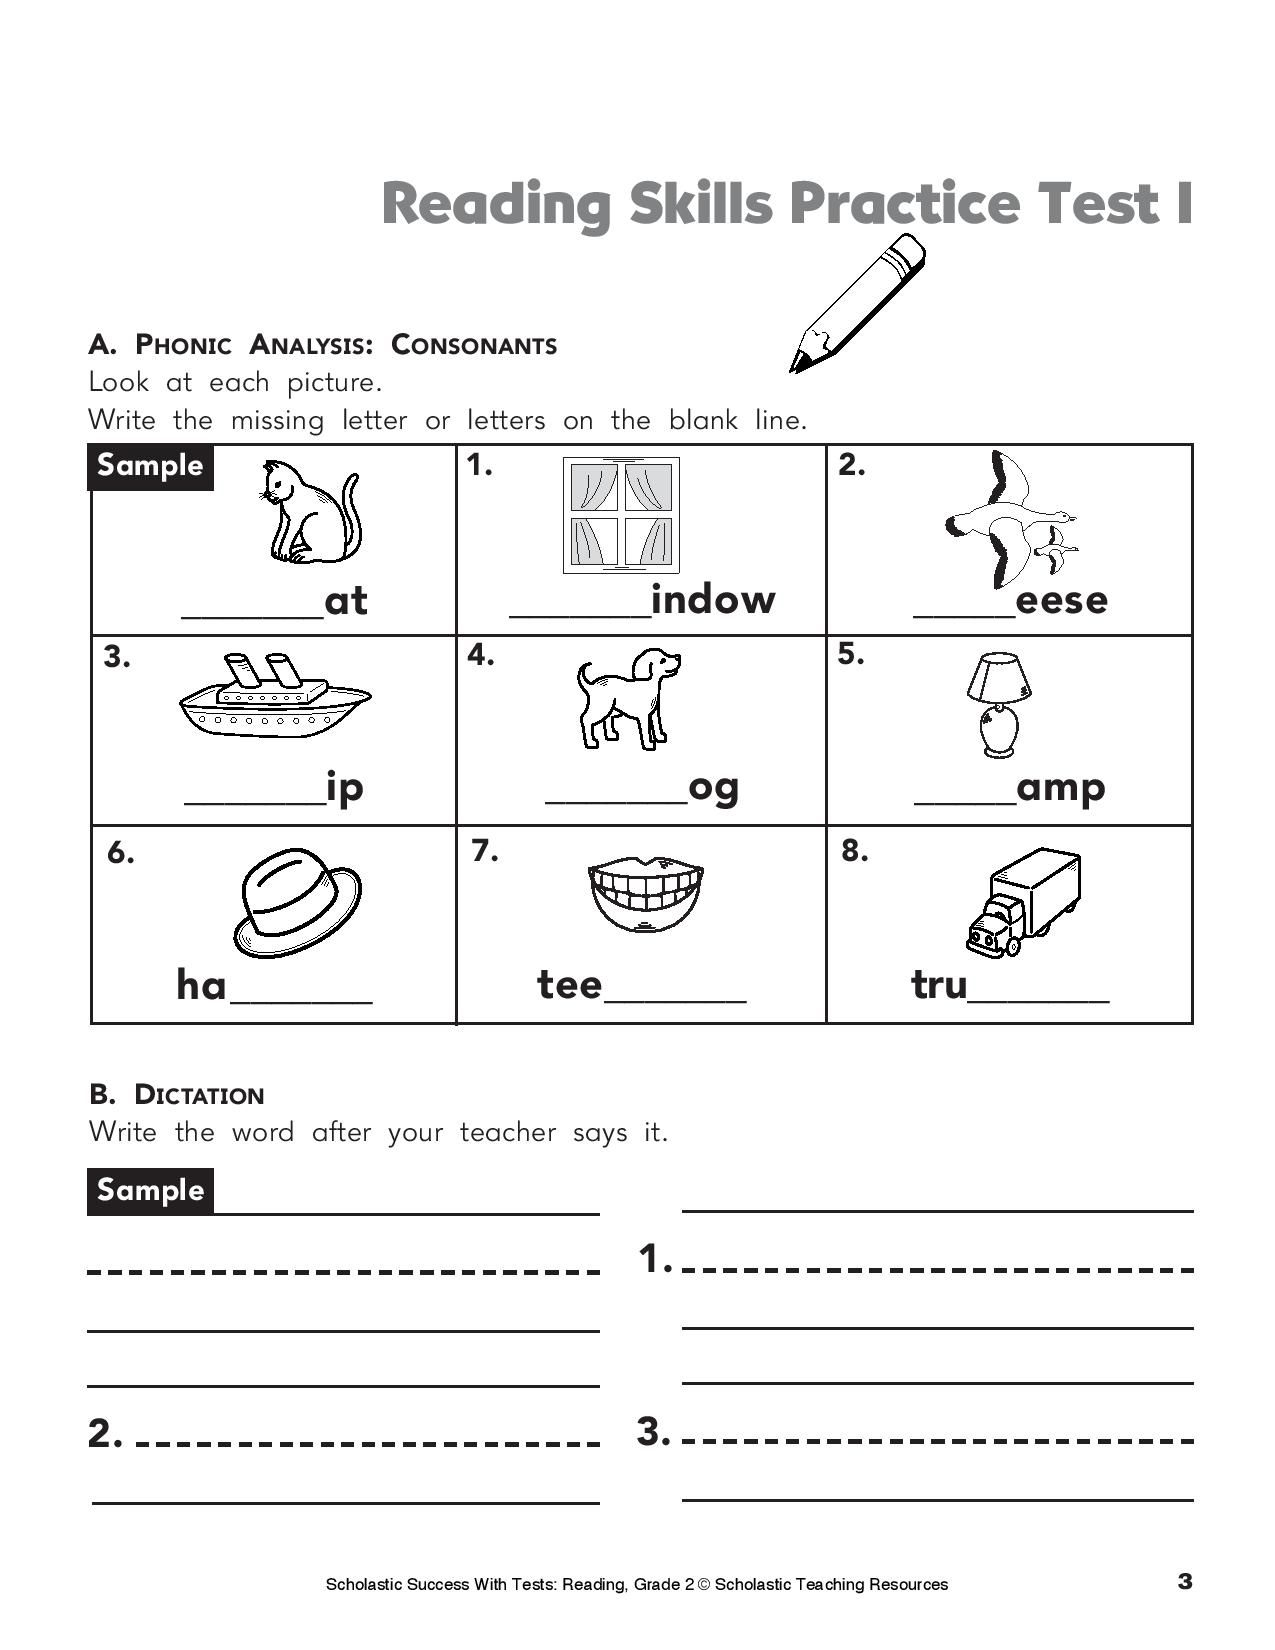 Give Your Child This Printable Reading Practice Test On Phonics - Hooked On Phonics Free Printable Worksheets